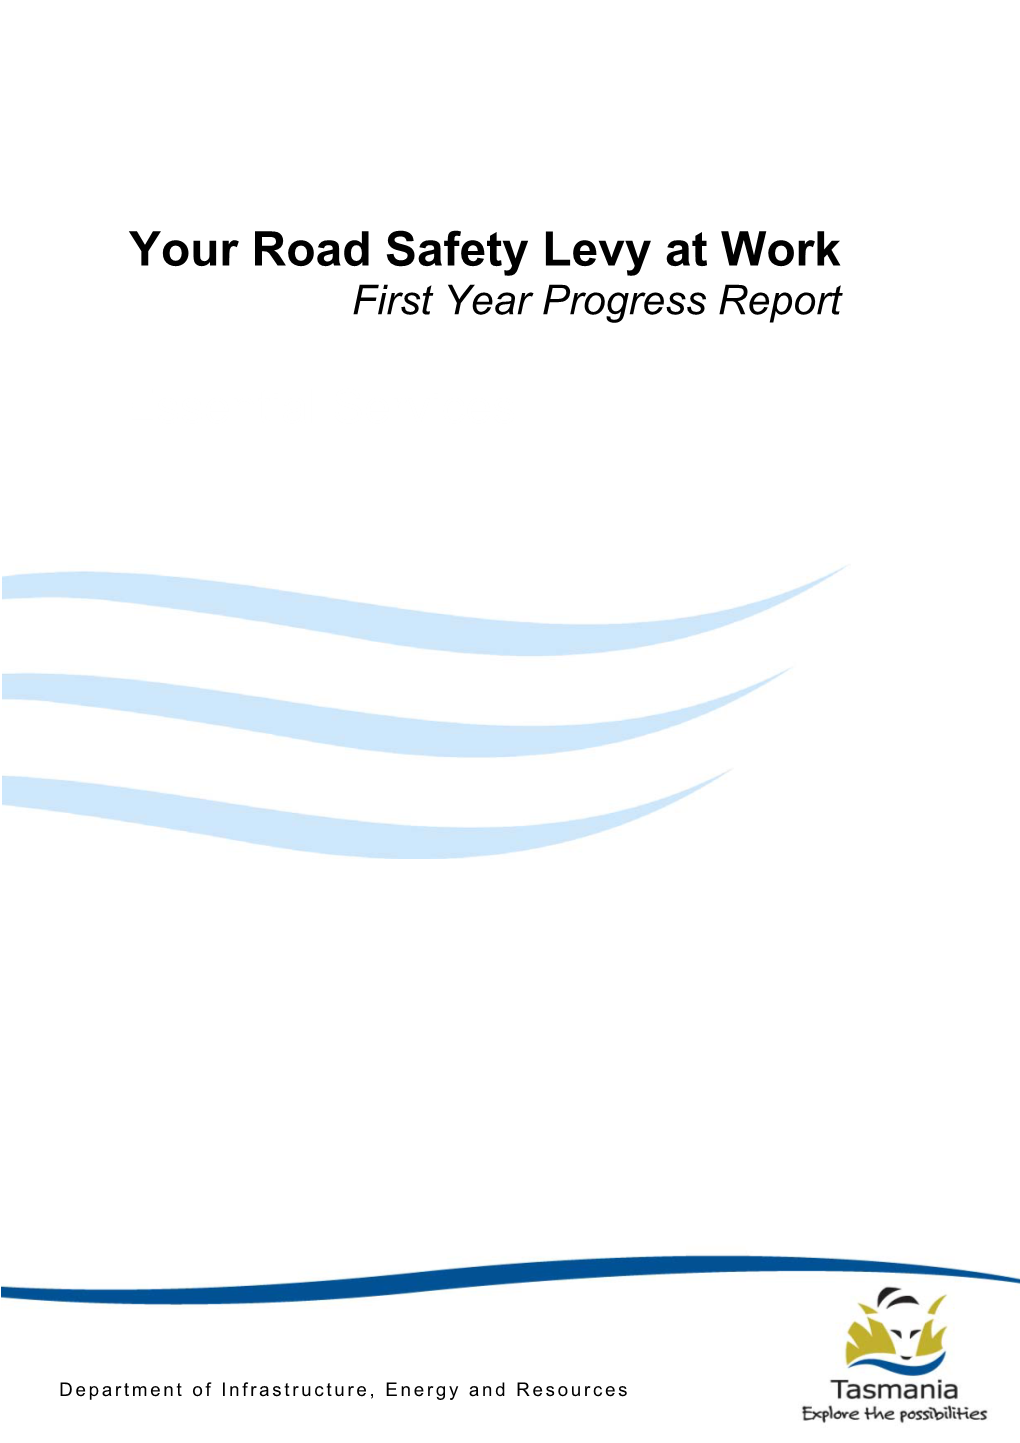 Your Road Safety Levy at Work First Year Progress Report